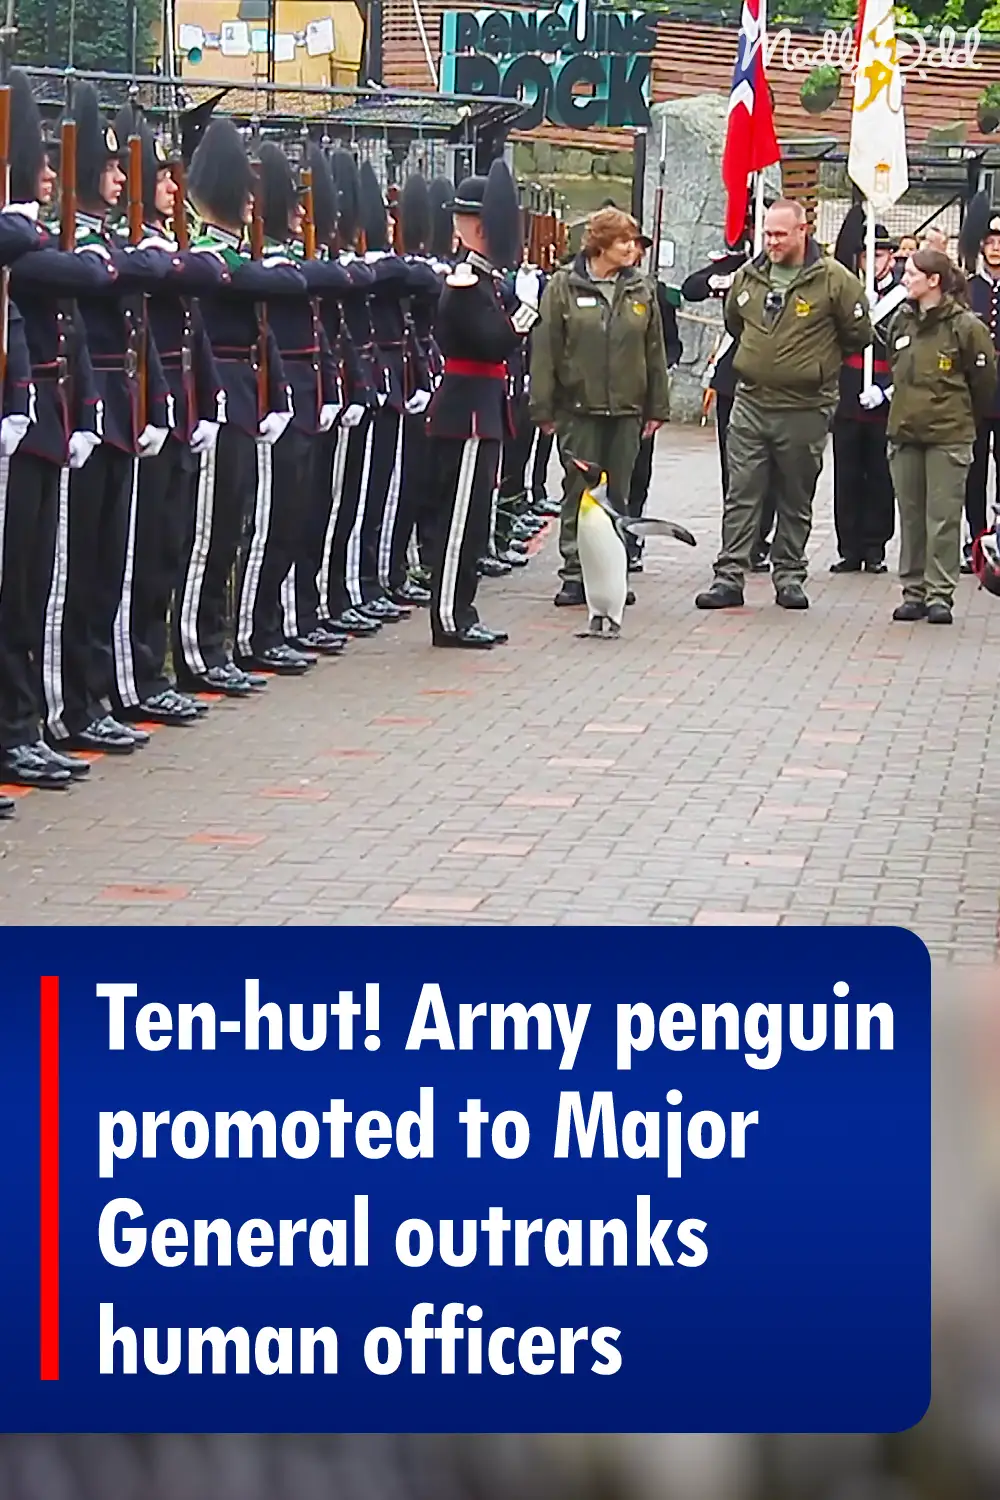 Ten-hut! Army penguin promoted to Major General outranks human officers